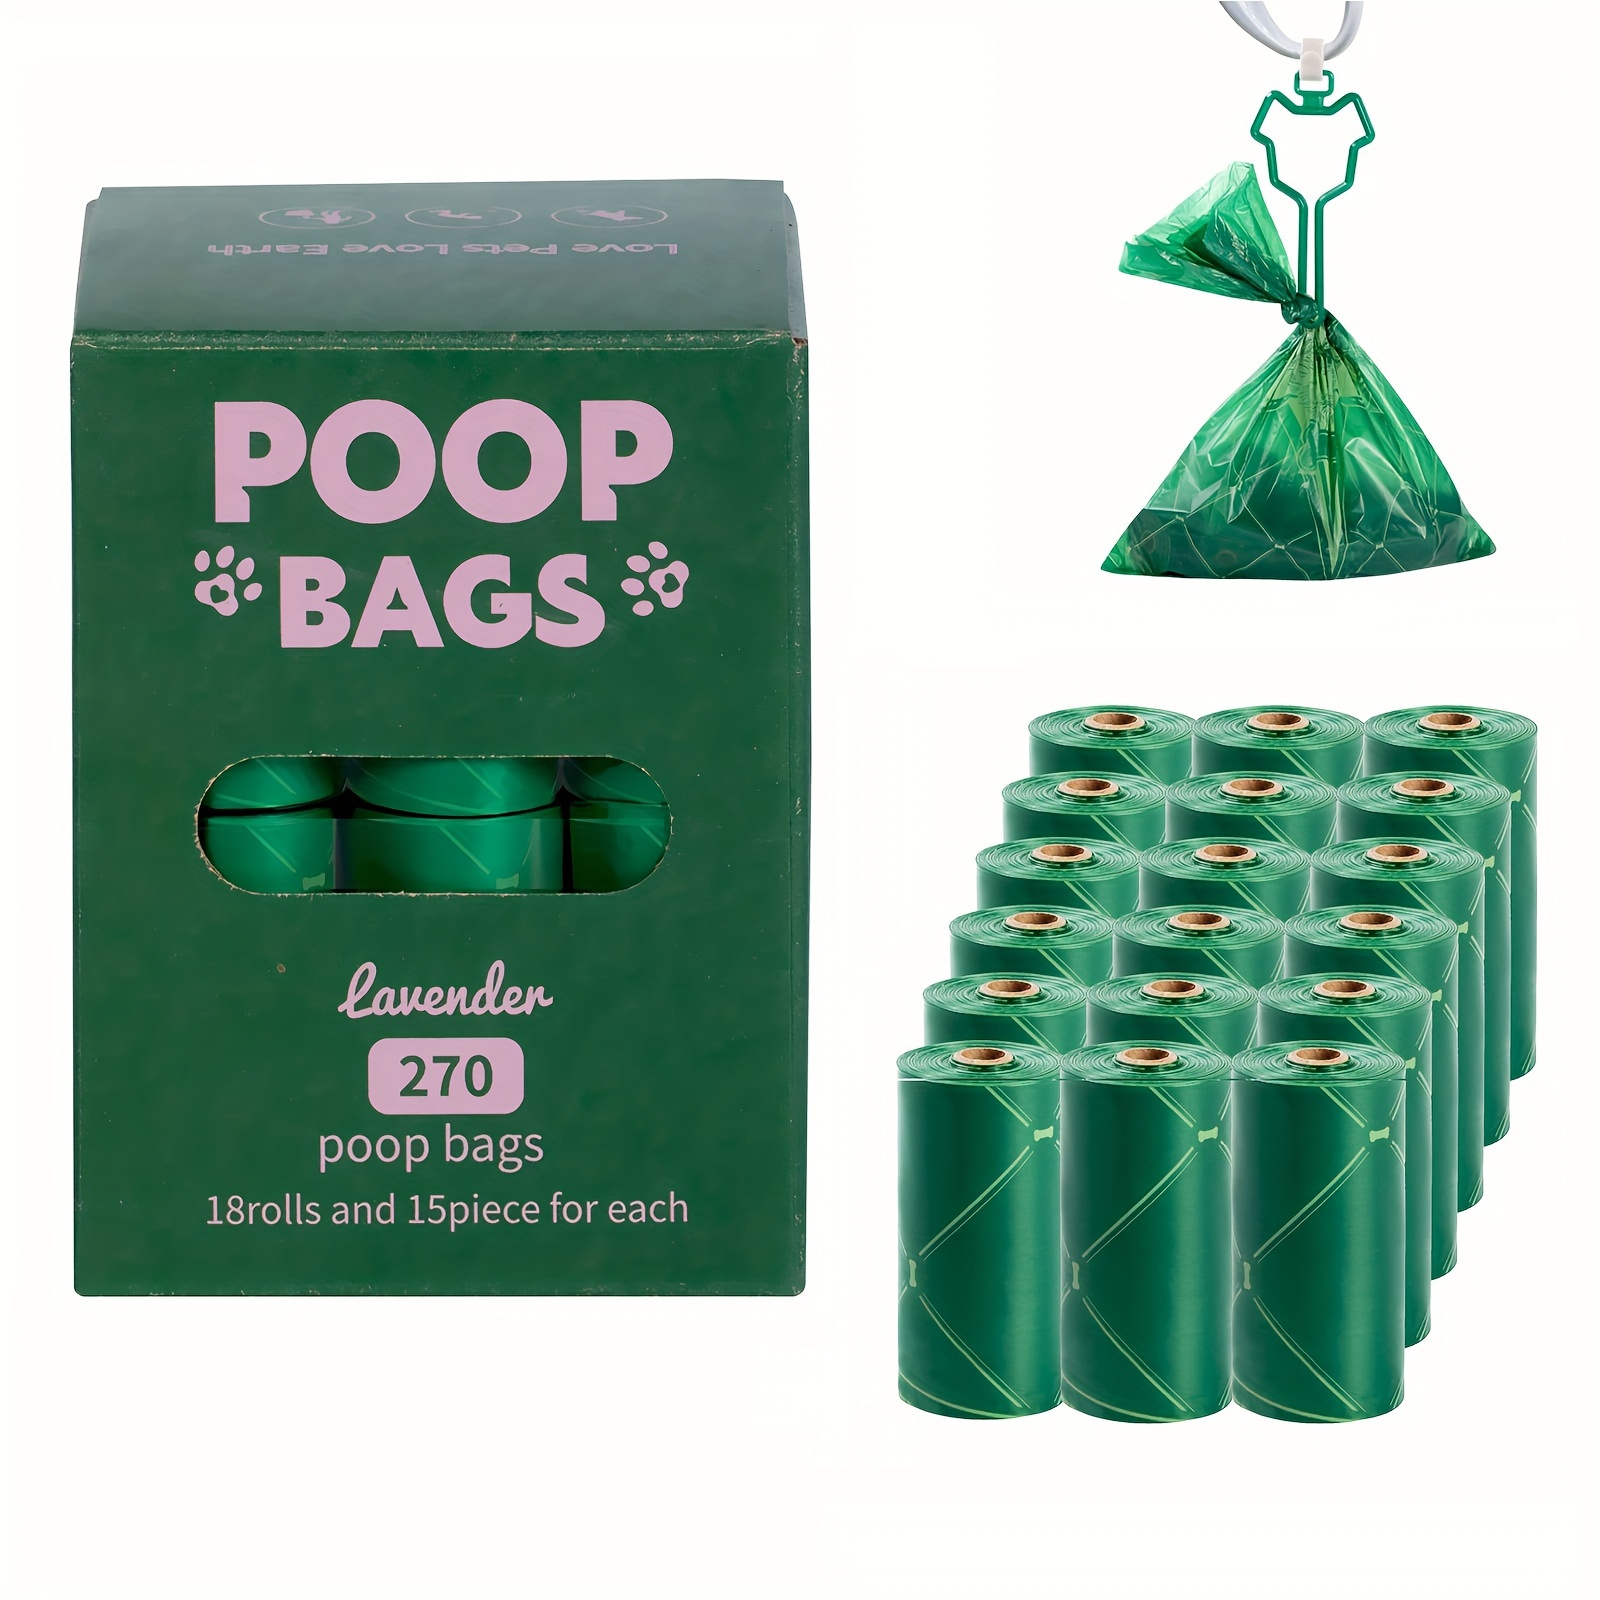 

Dog Poop Bags, Guaranteed Leak Proof And Extra Thick Waste Bag Refill Rolls For Dogs, Lavender Scented, 270 Count